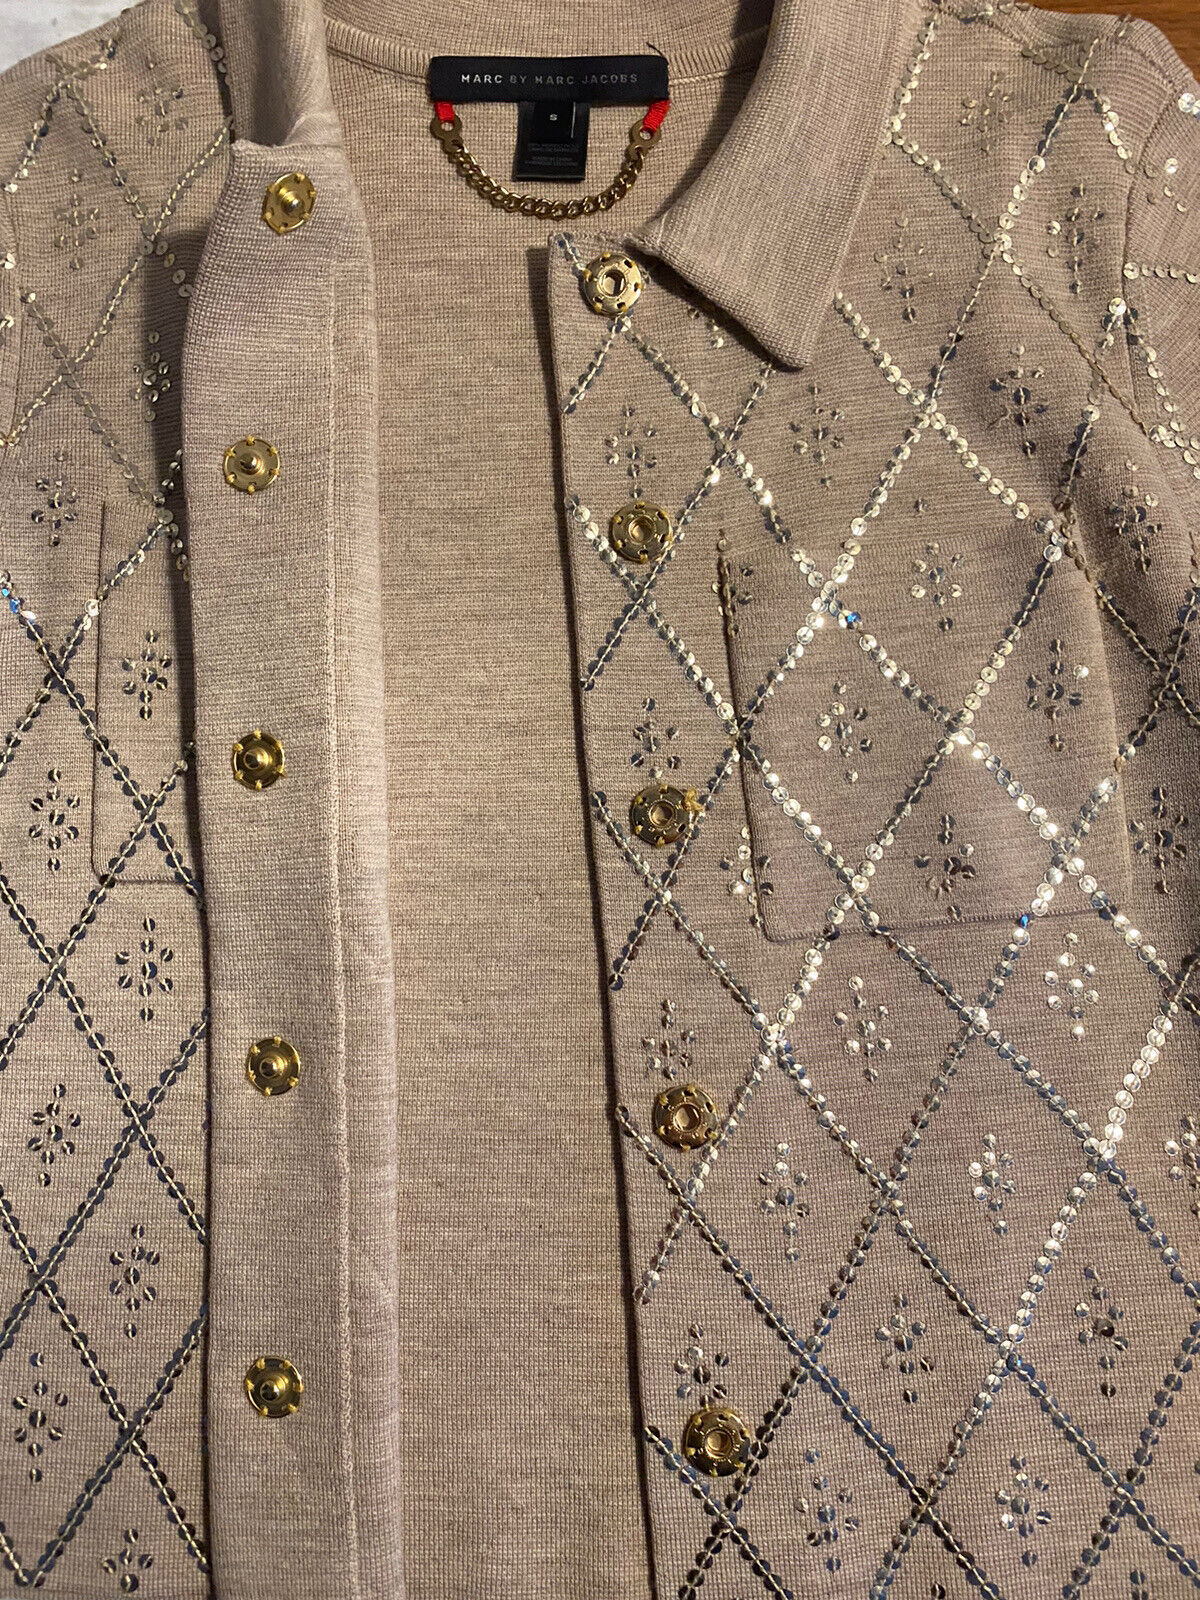 Marc Jacobs Beige Blazer with Gold Sequins Small - image 5